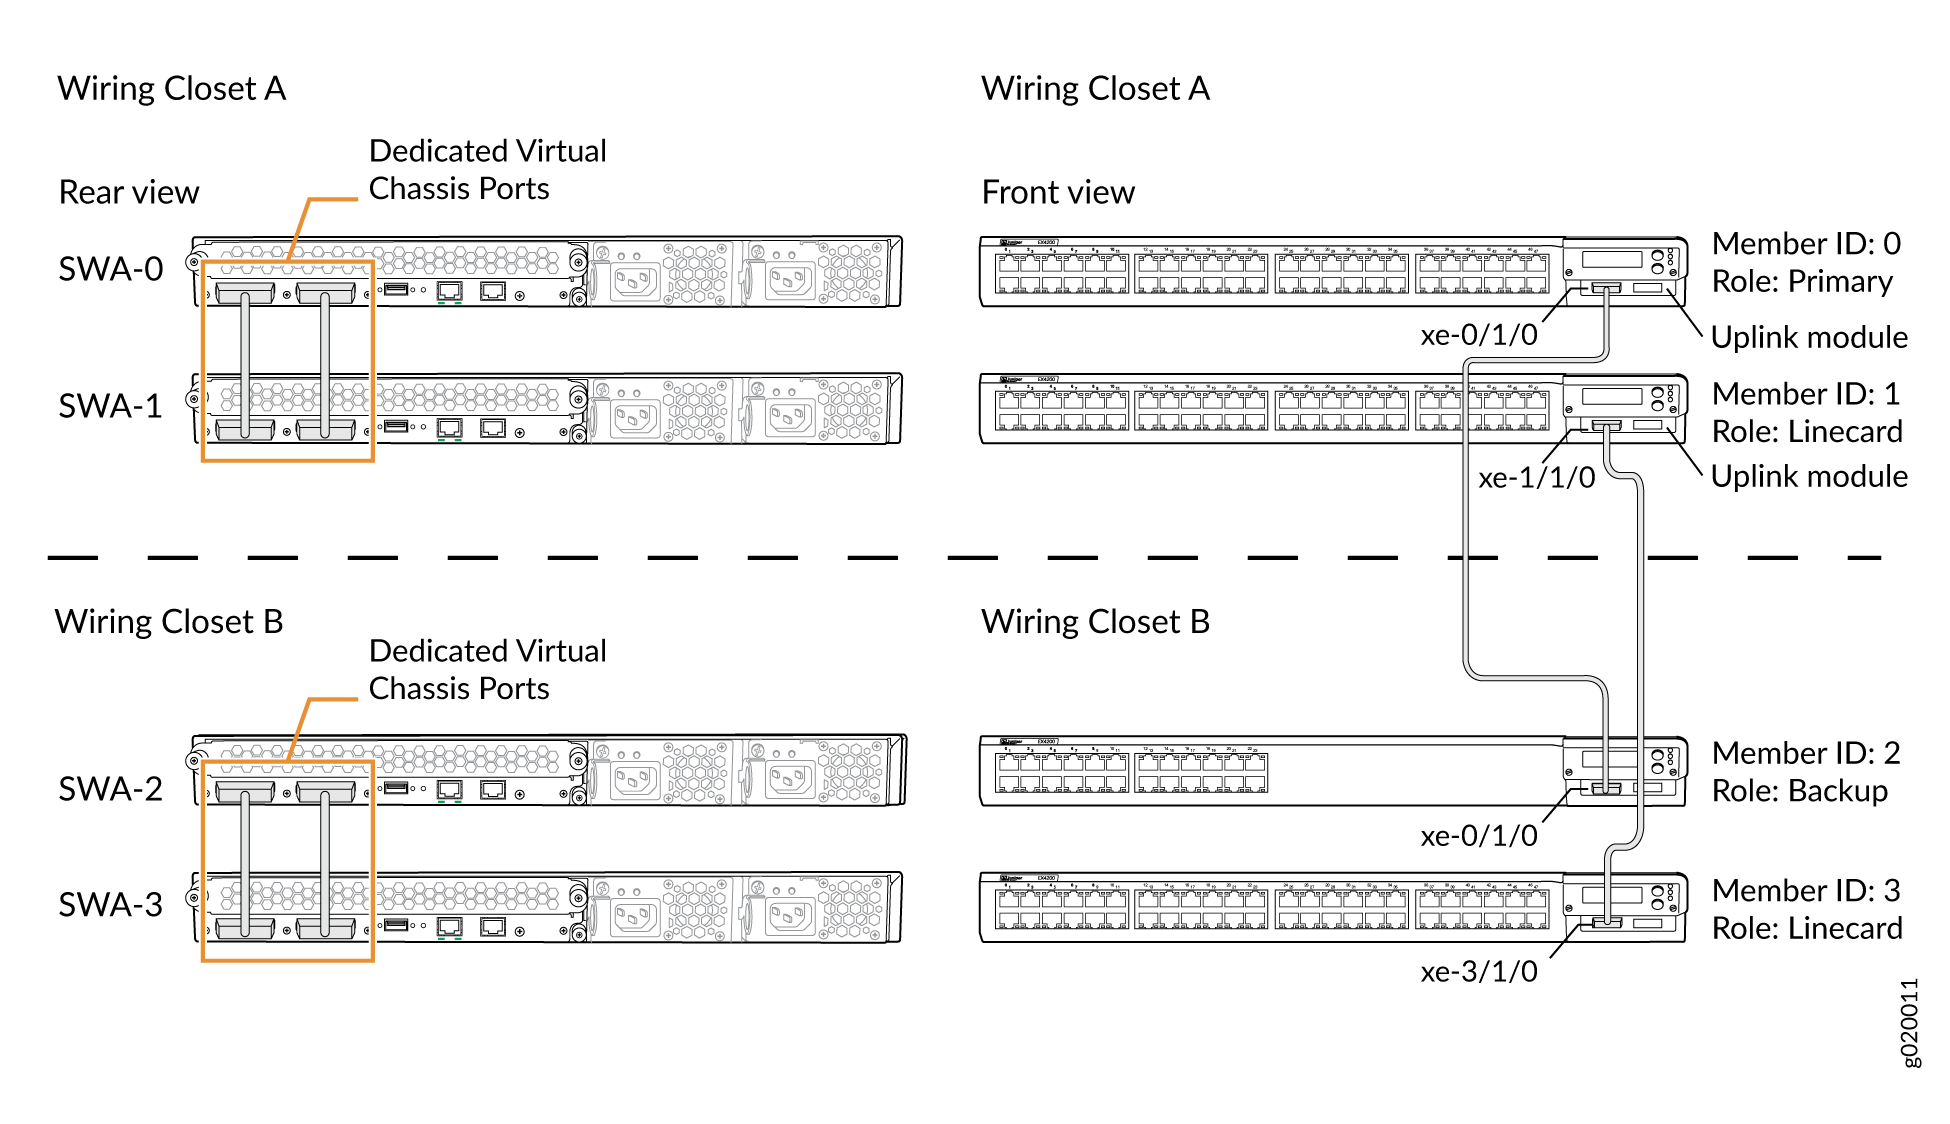 EX4200 Virtual Chassis Interconnected Across Wiring Closets